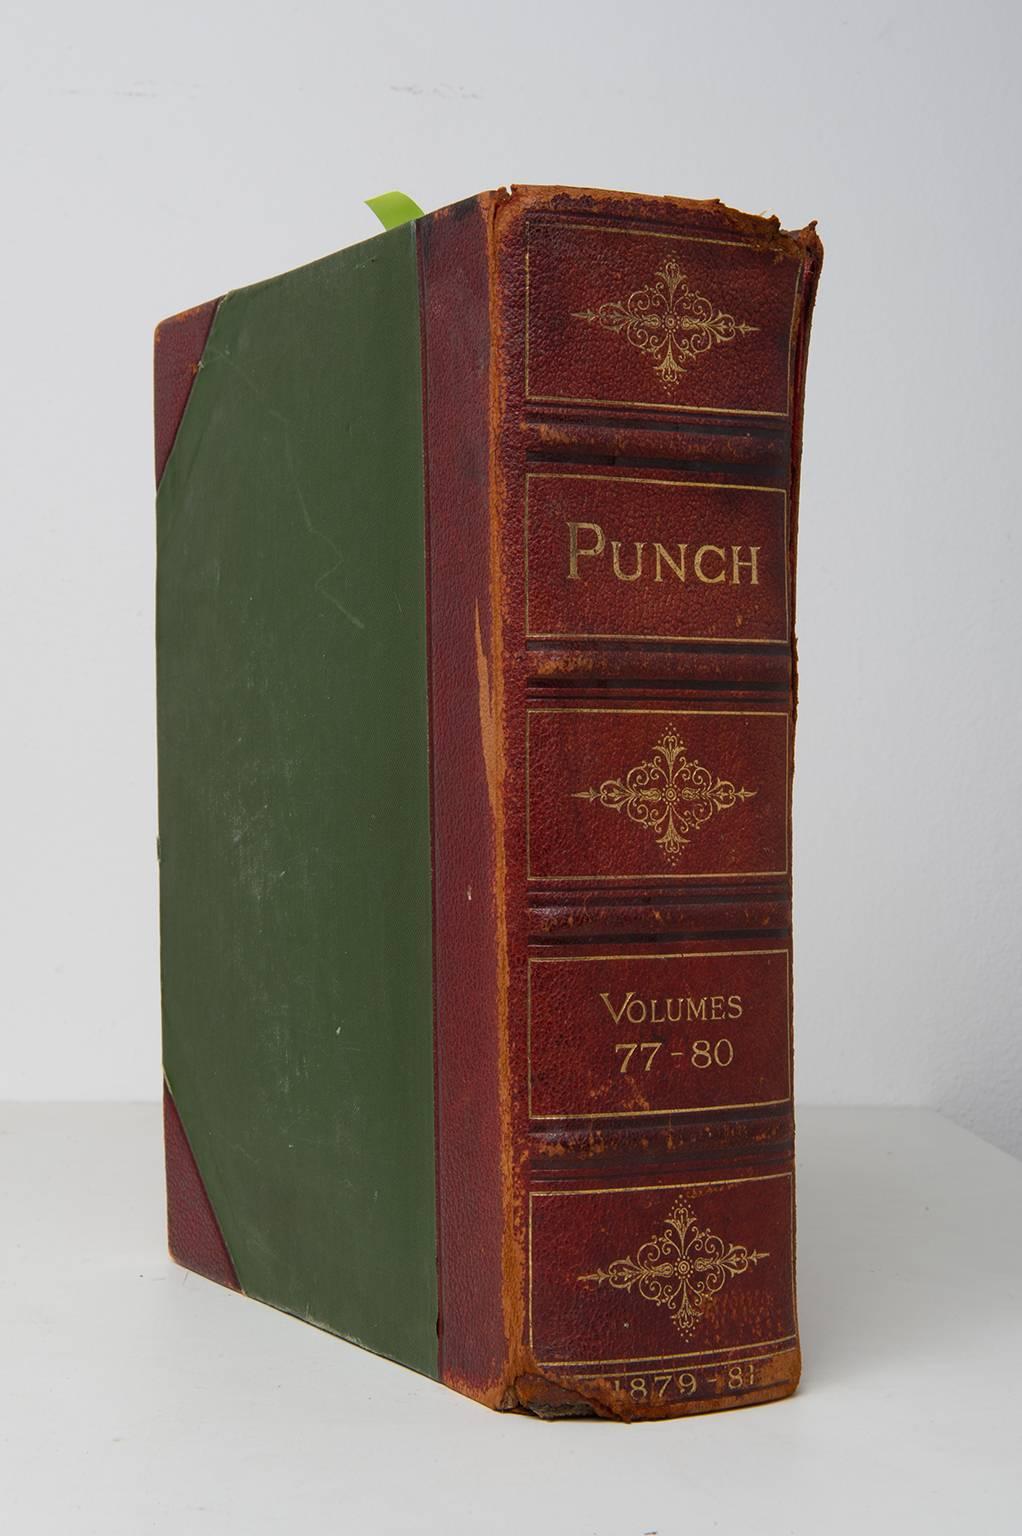 Pressed Old English book PUNCH